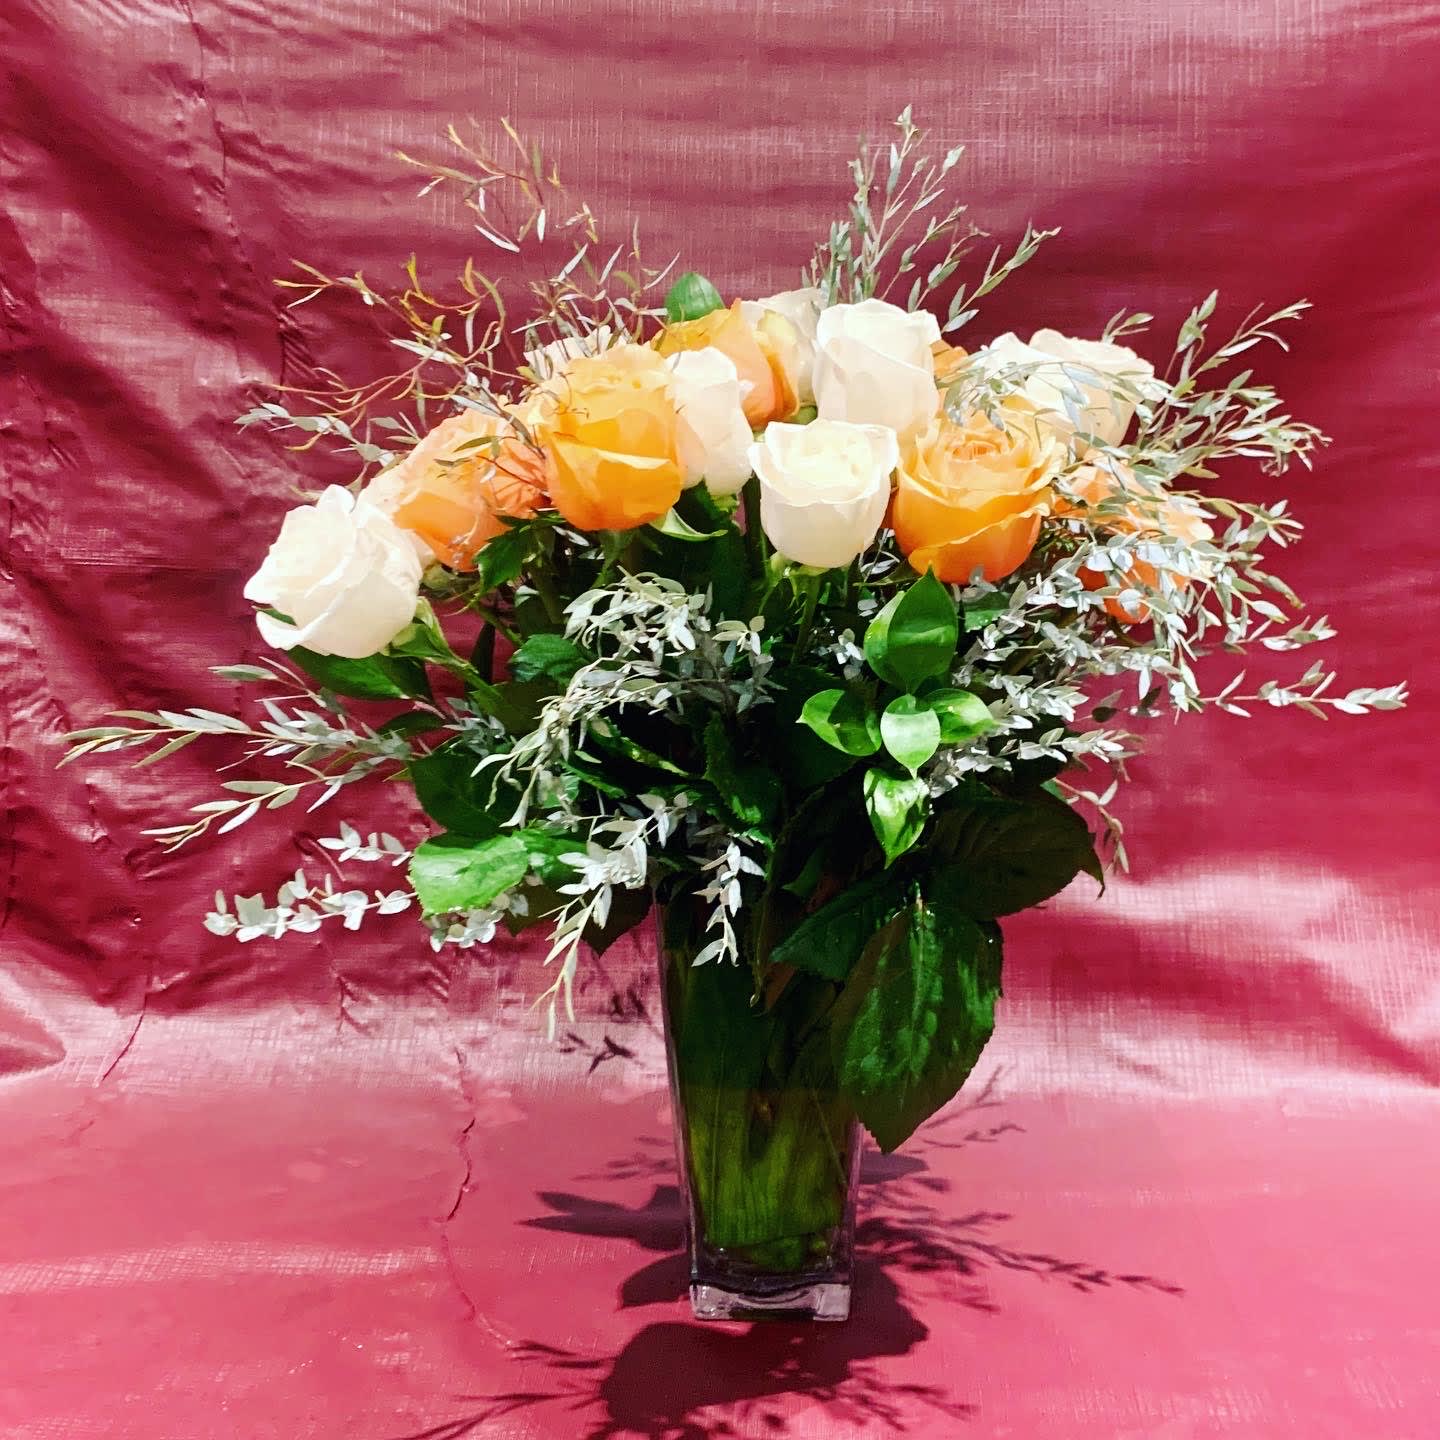 Custom Arrangement of white roses, peach roses &amp; greens in clear glass vase with leaf wrap - Custom Arrangement of white roses, peach roses &amp; greens in clear glass vase with leaf wrap